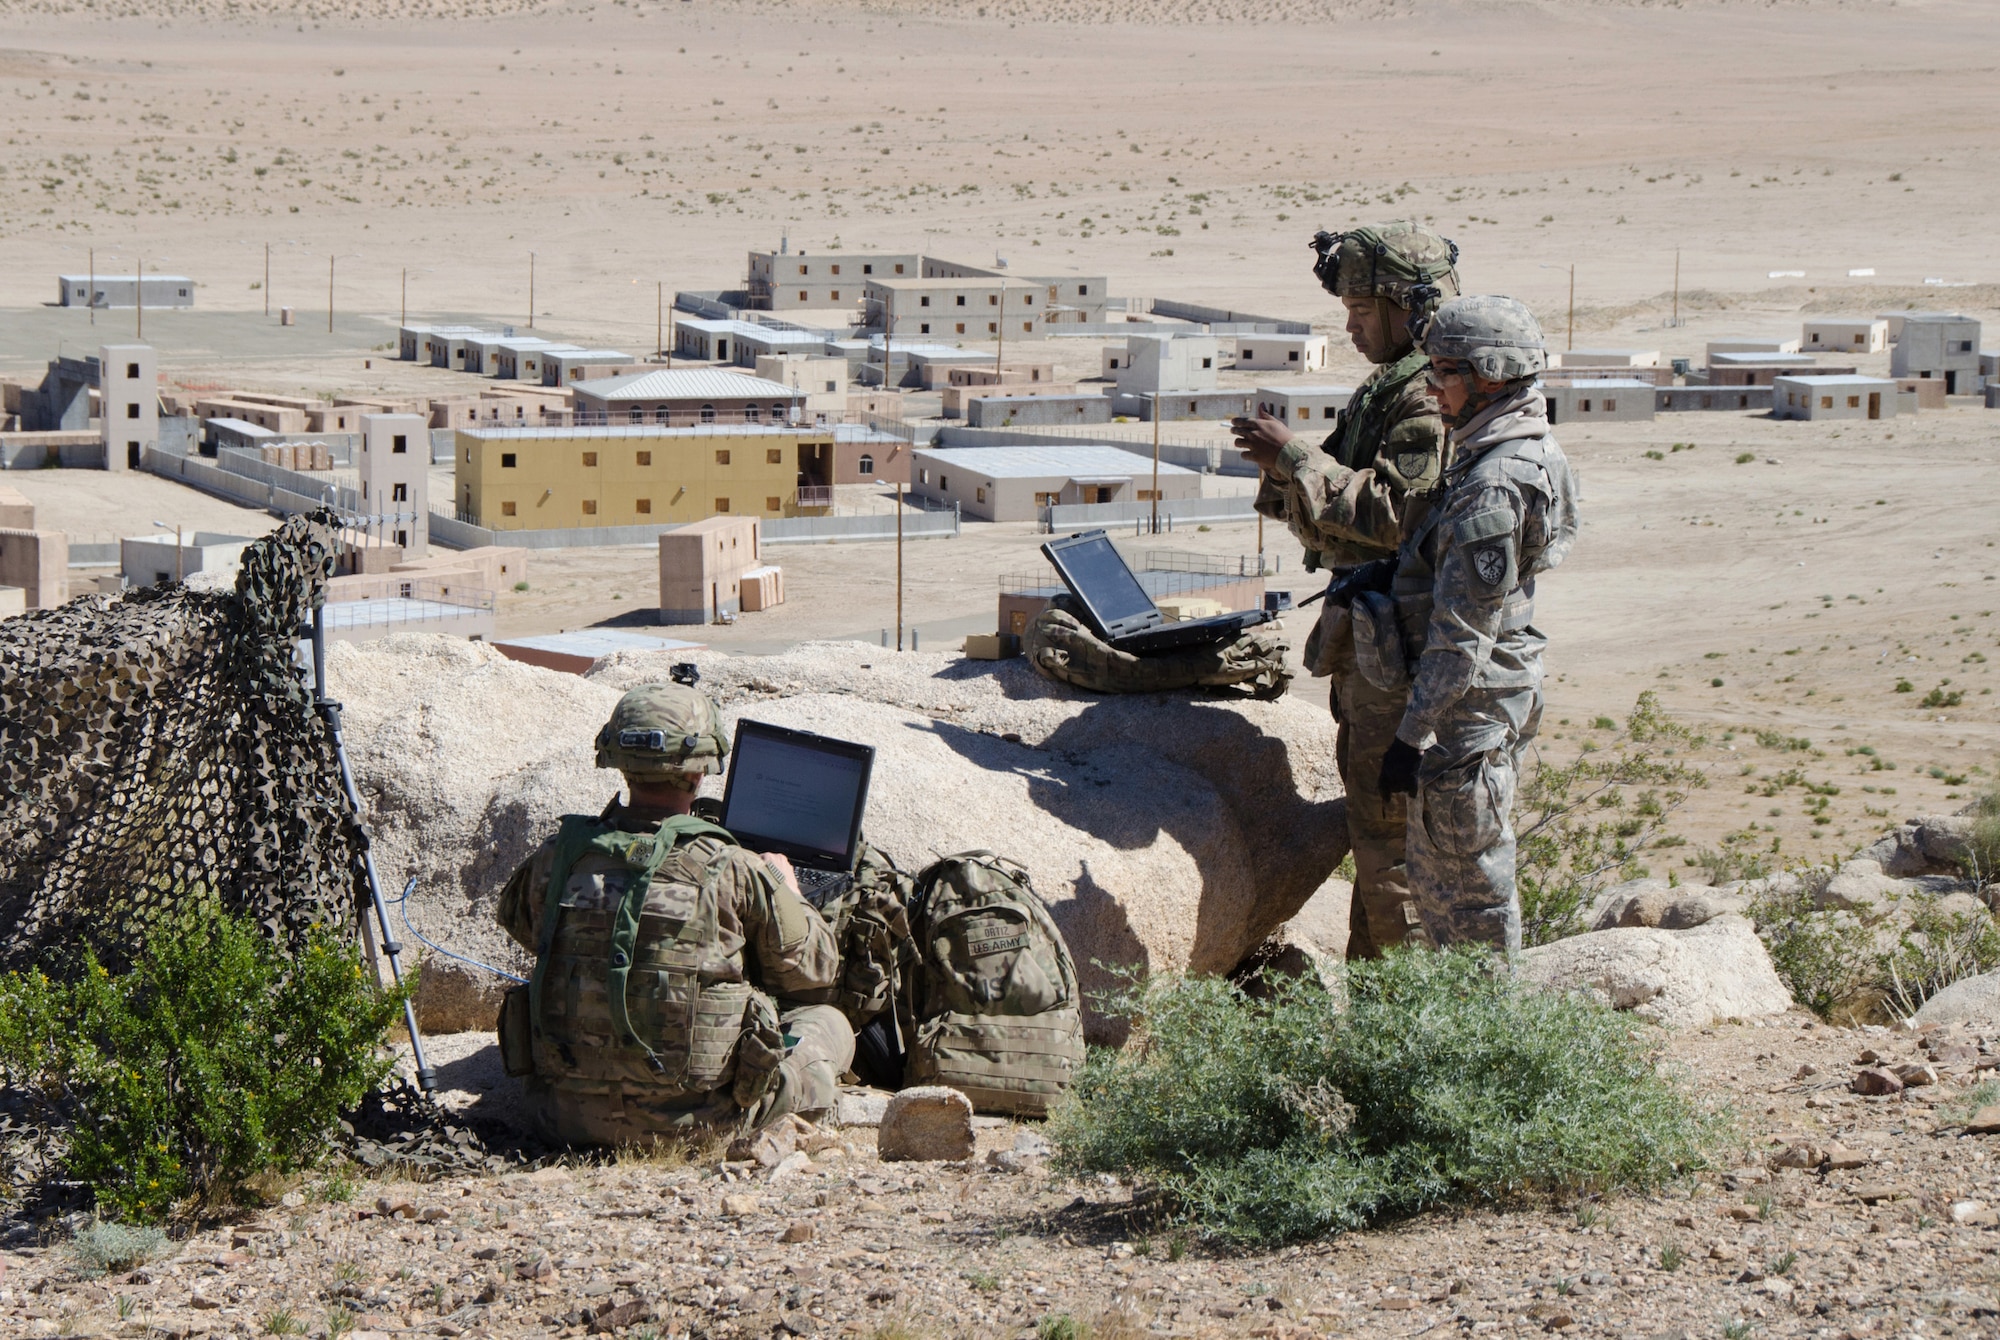 Soldiers of 780th Military Intelligence Brigade set up cyber tools overlooking mock city of Razish at National Training Center, Fort Irwin, California, May 7, 2017 (U.S. Army/Bill Roche)